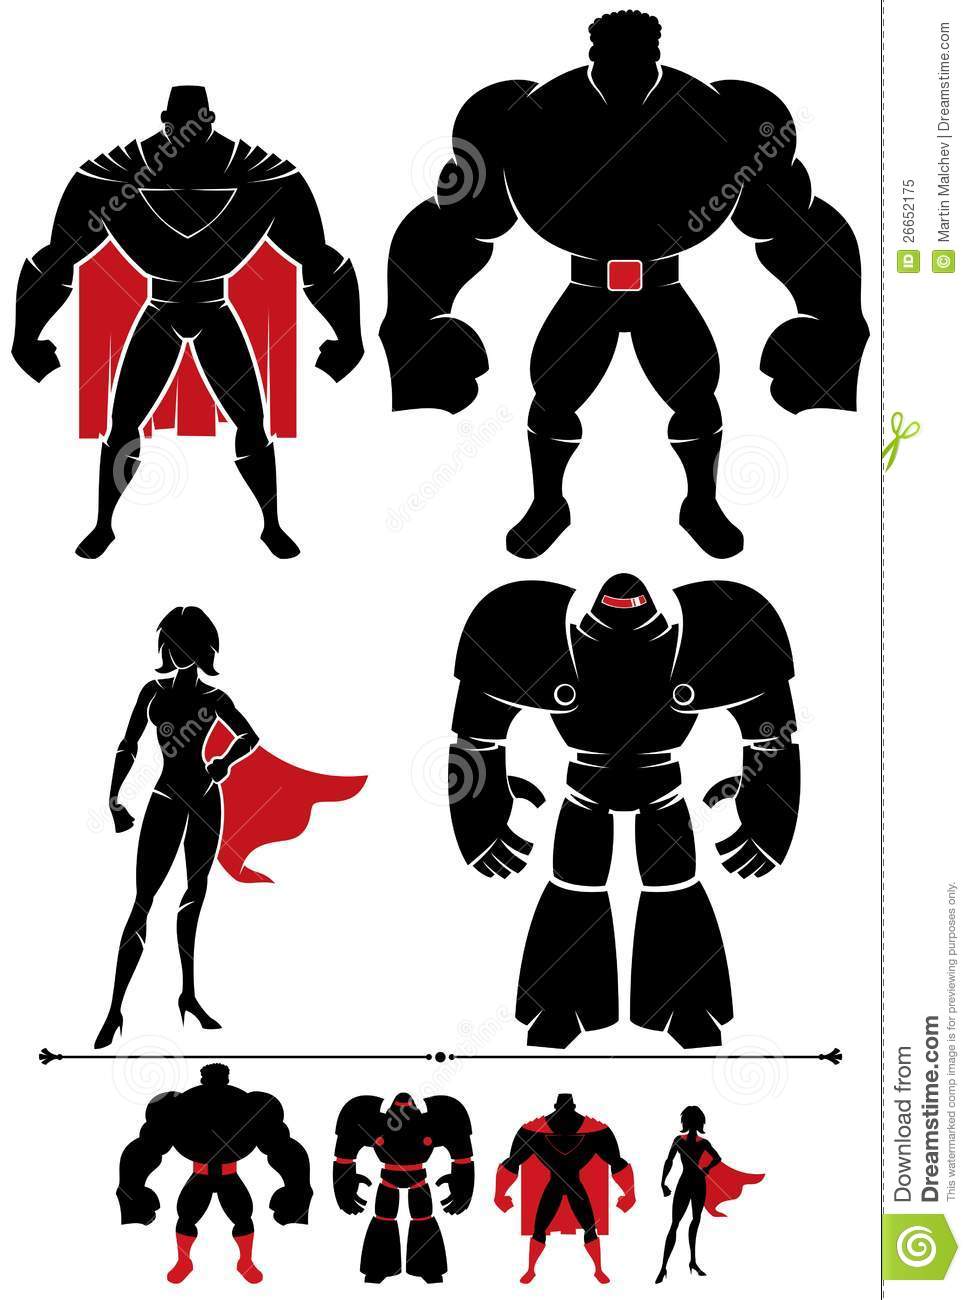 Different Superhero Silhouettes In 2 Versions Each 